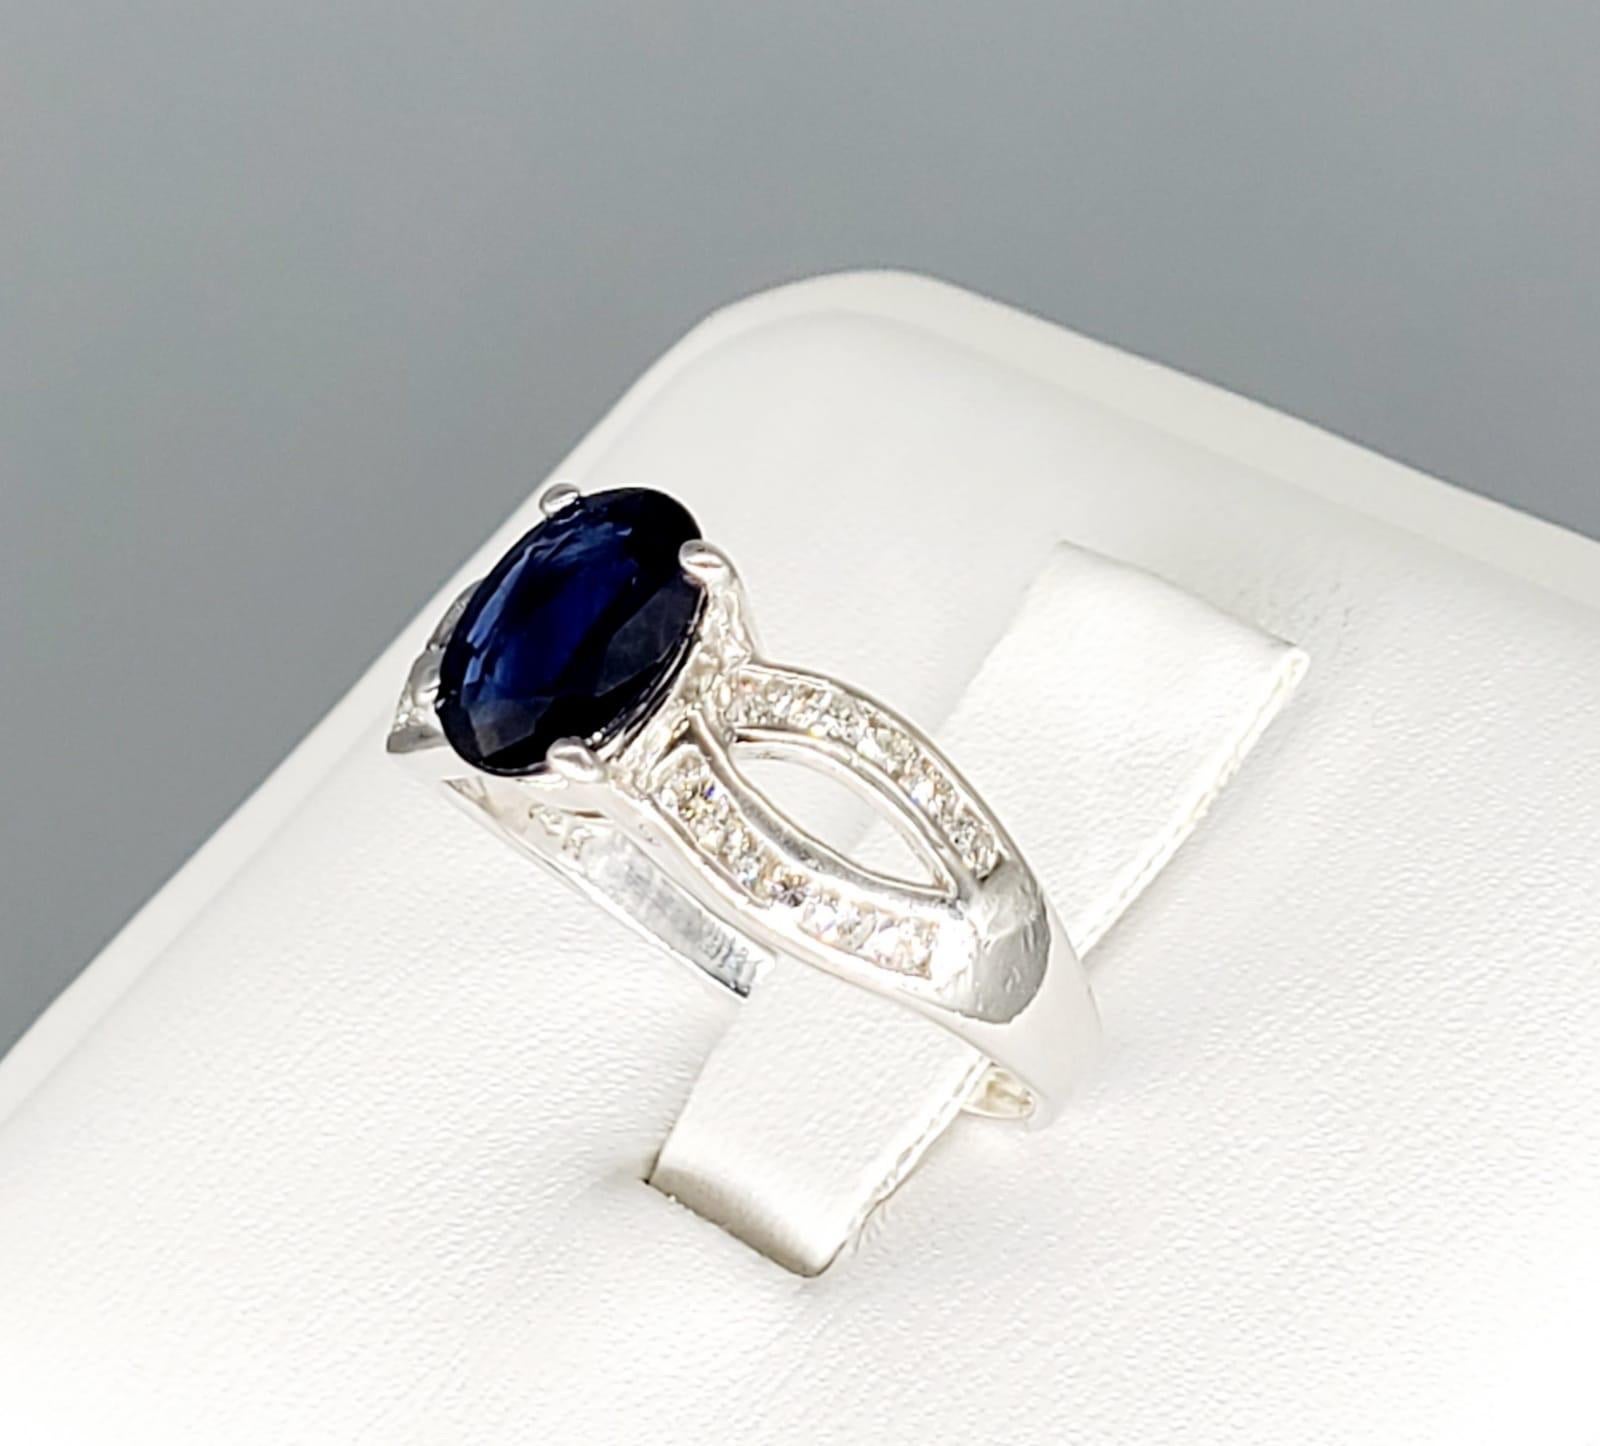 Vintage 2 Carats Blue Sapphire & Diamonds Bow Design Engagement Ring. The ring is a beautiful piece sparkling from every angle a true master piece. Featuring a center blue sapphire weighting approx 1.50 carat and is surrounded by 0.50 carats white